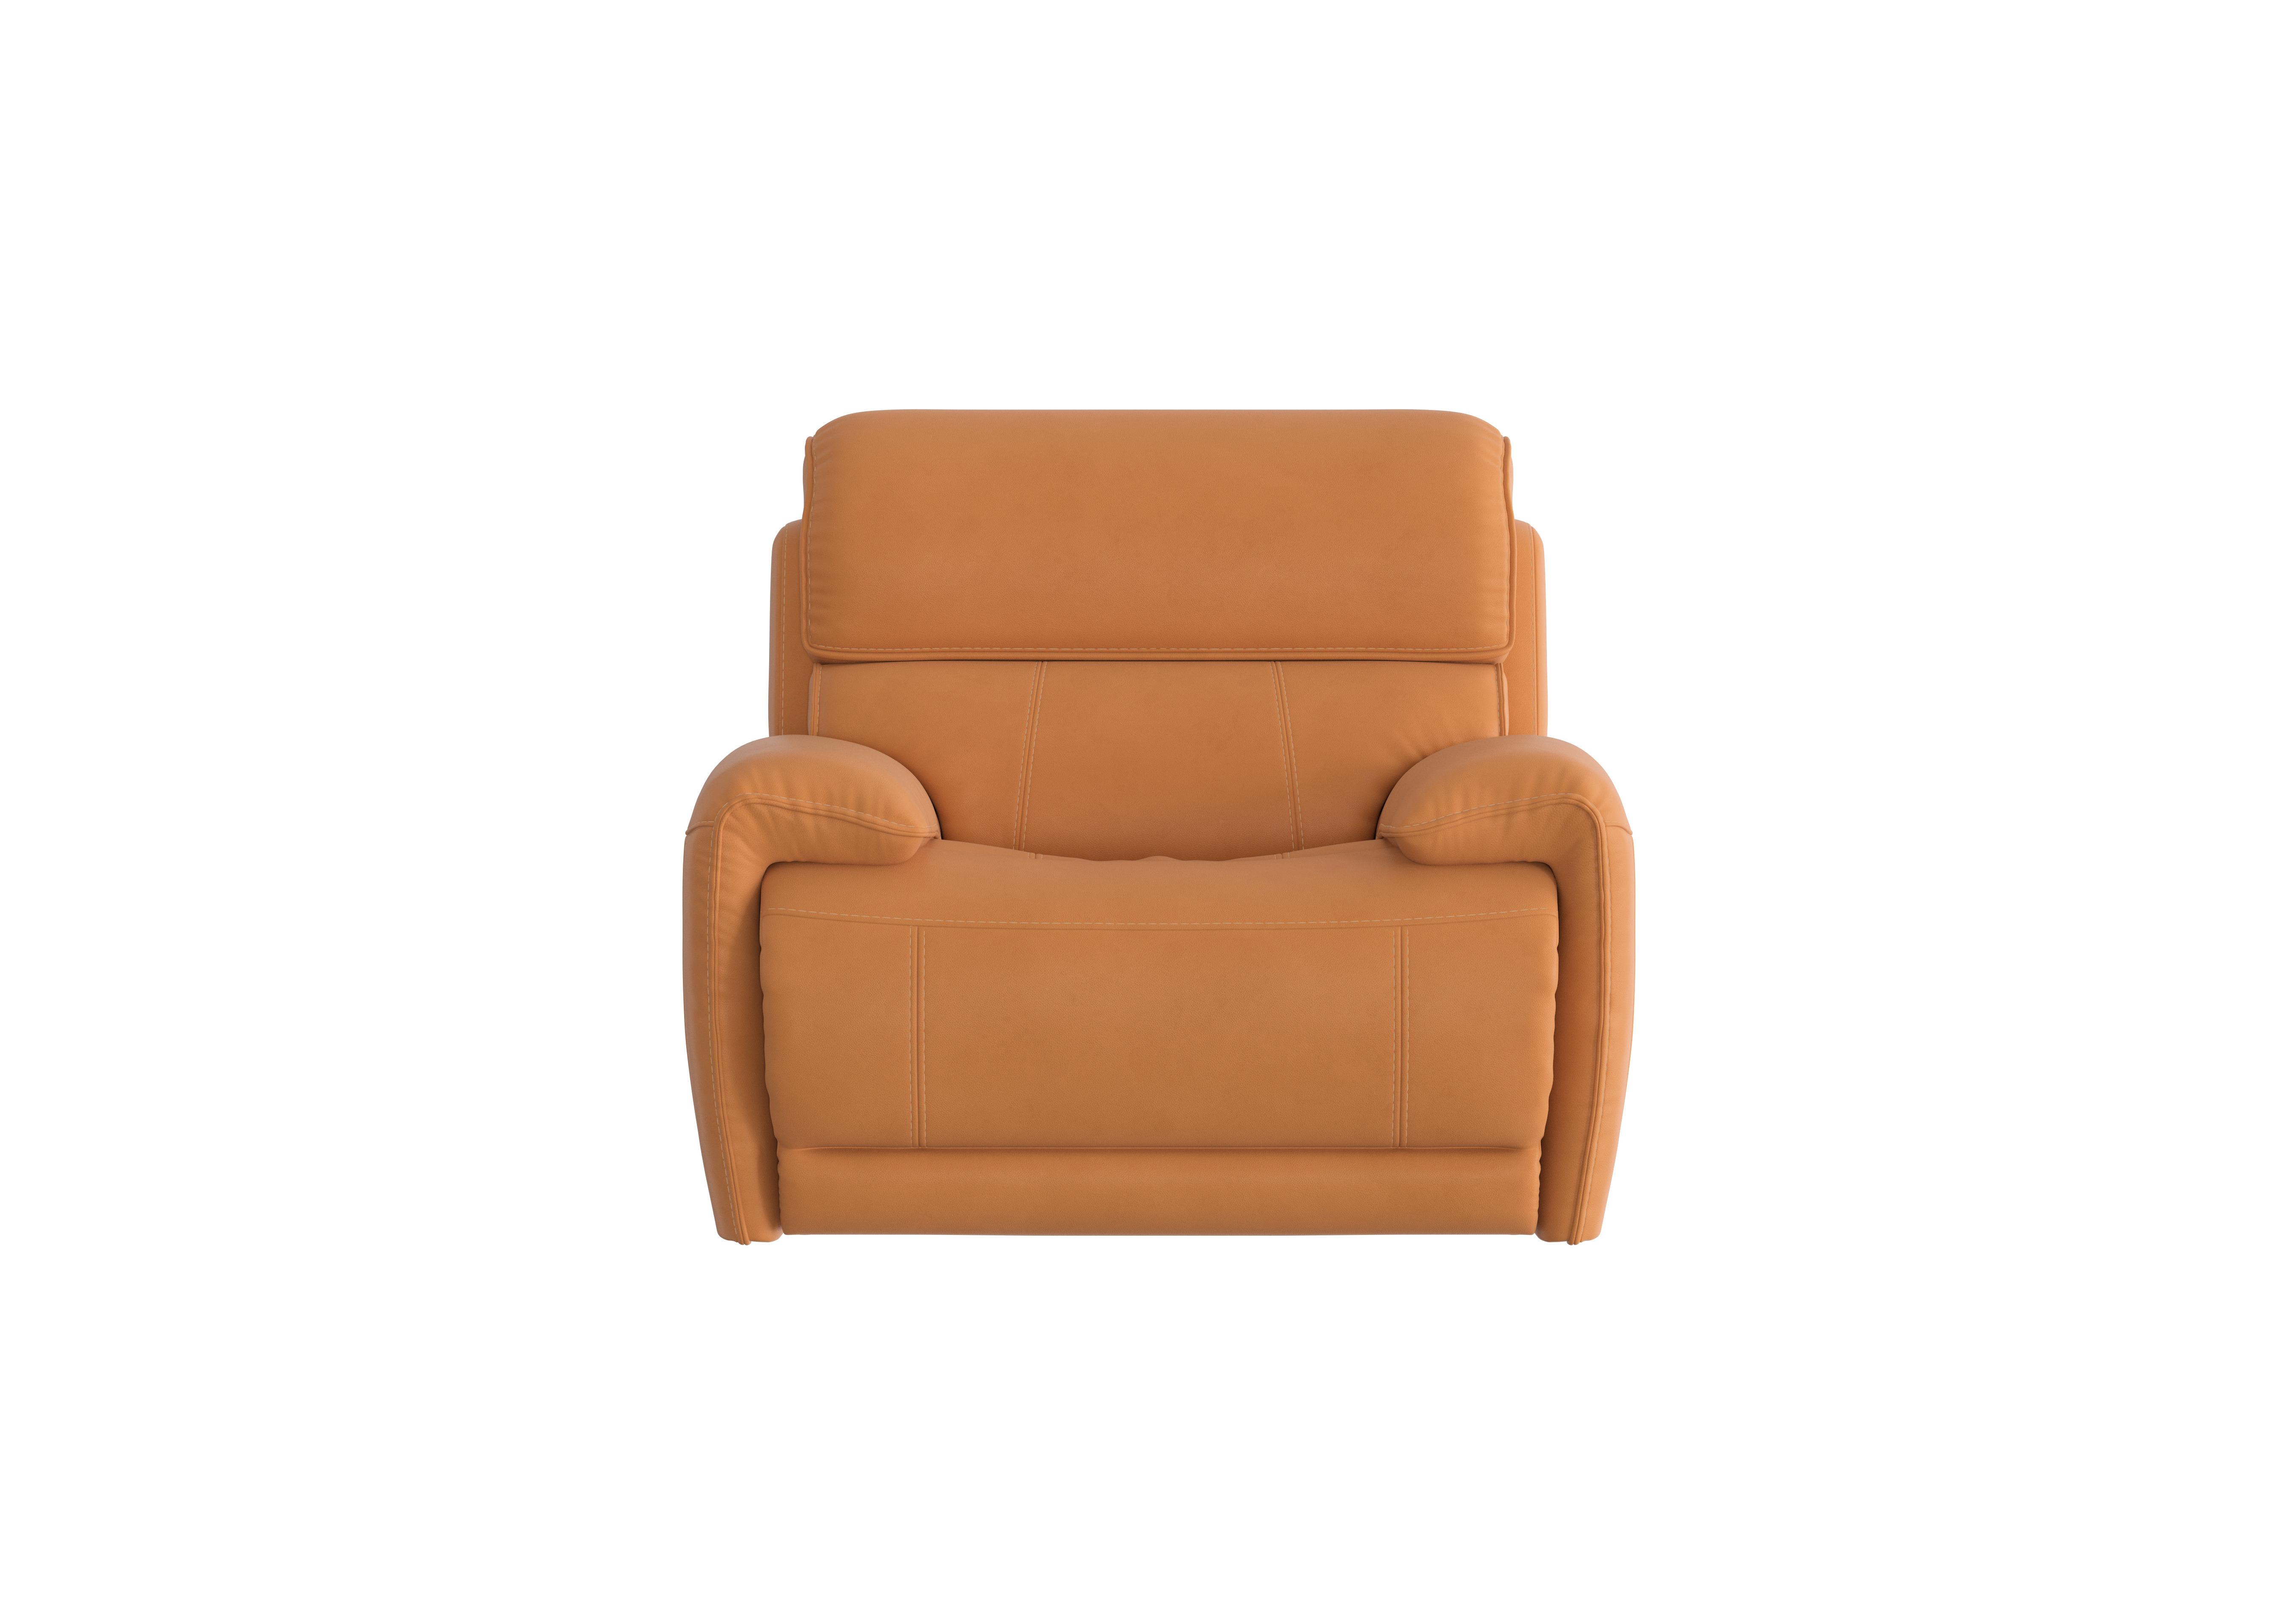 Link Leather Armchair in Bv-335e Honey Yellow on Furniture Village